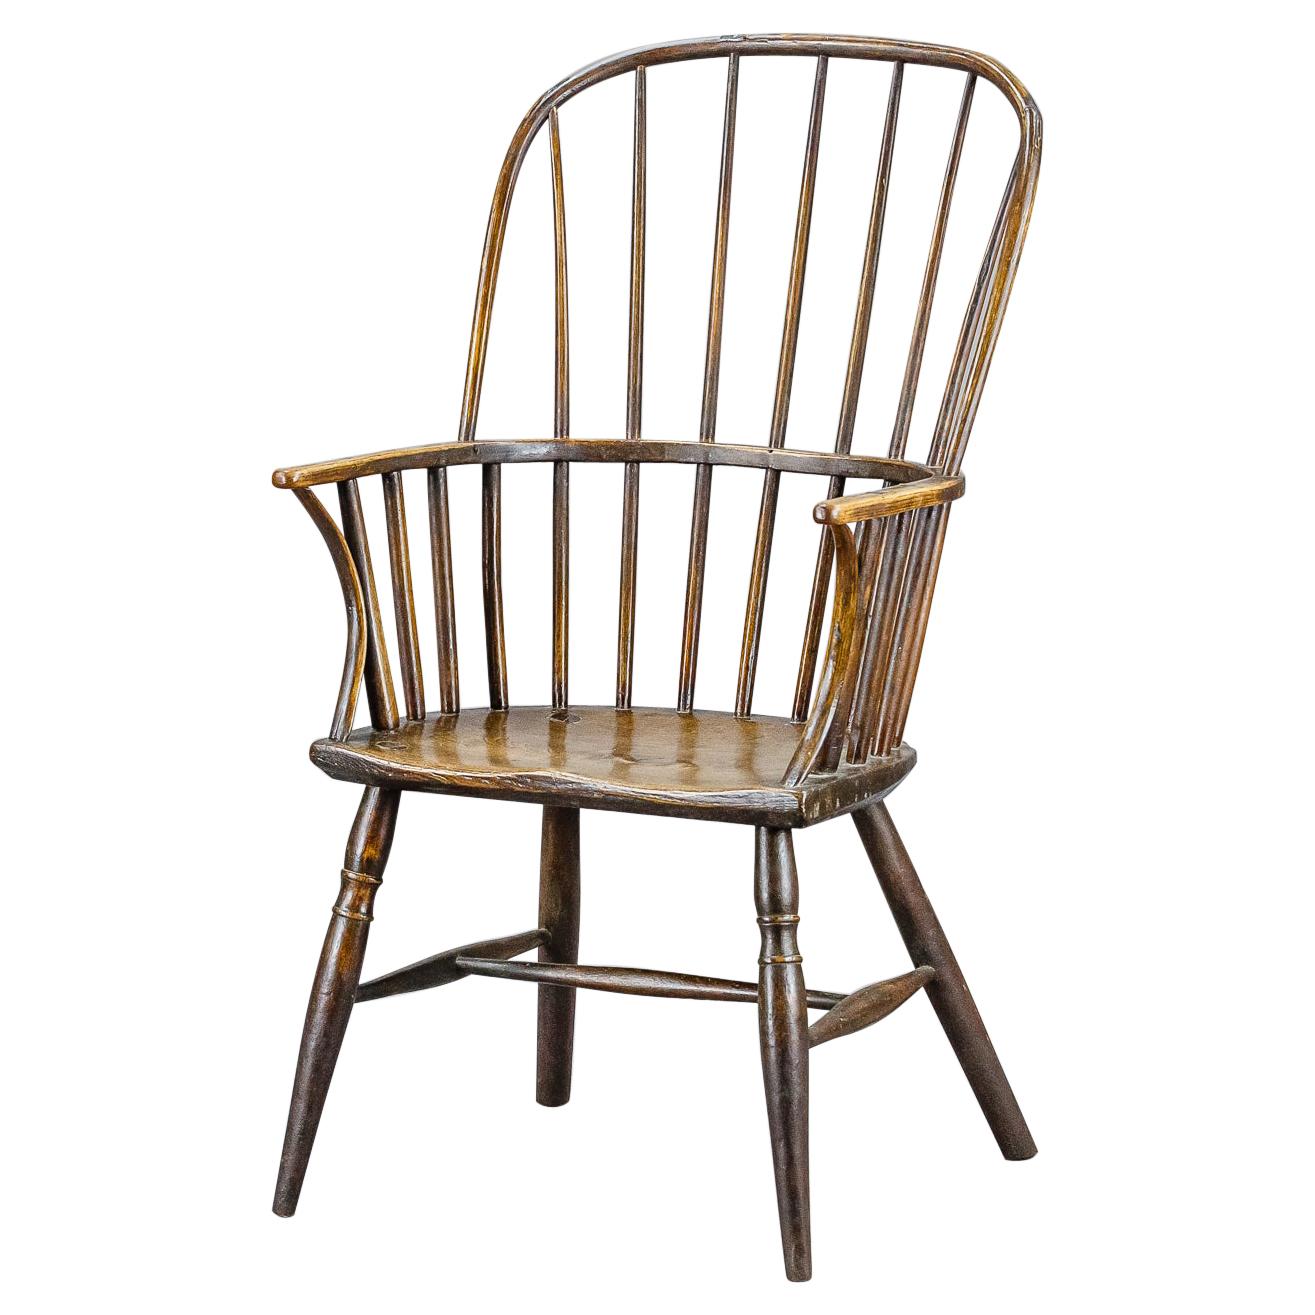 English Early 19th Century Country Hoop Back Windsor Chair